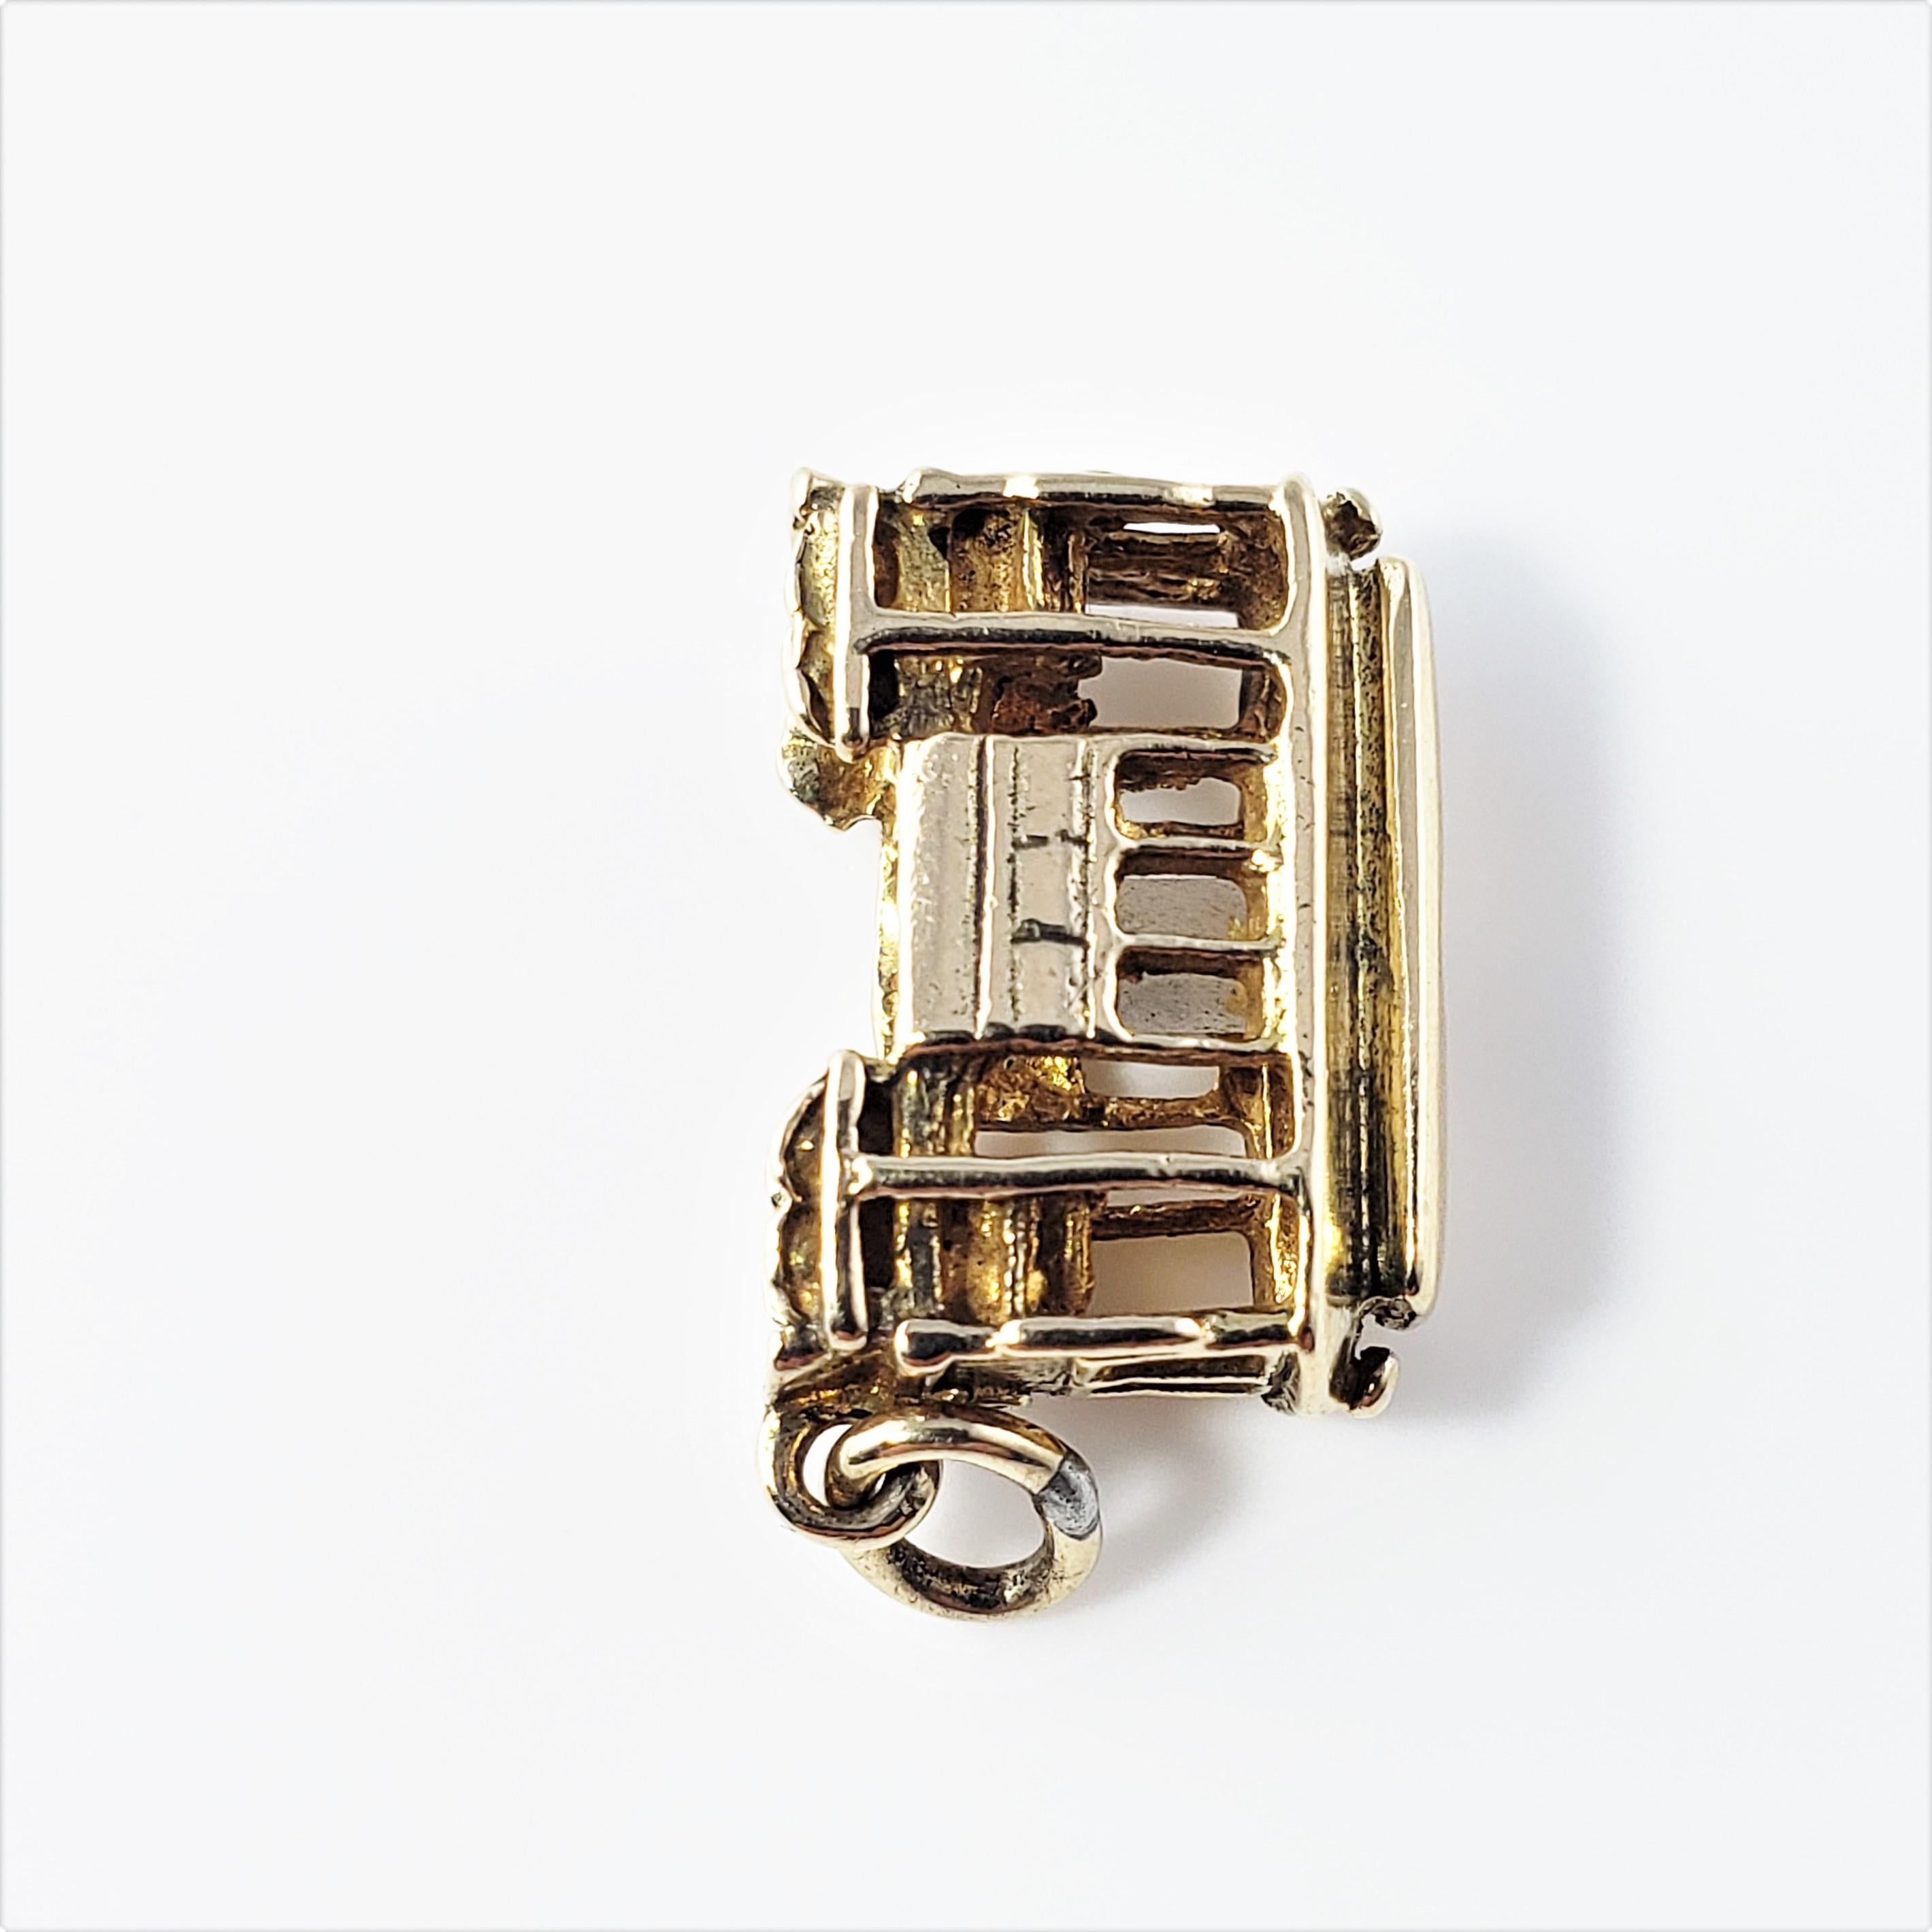 14 Karat Yellow Gold Trolley Car Charm-

Take a ride on the trolley car!

This lovely 3D charm features a miniature cable car meticulously detailed in 14K yellow gold.

*Image no longer visible through Stanhope.

Size:  16 mm  x  10 mm (actual